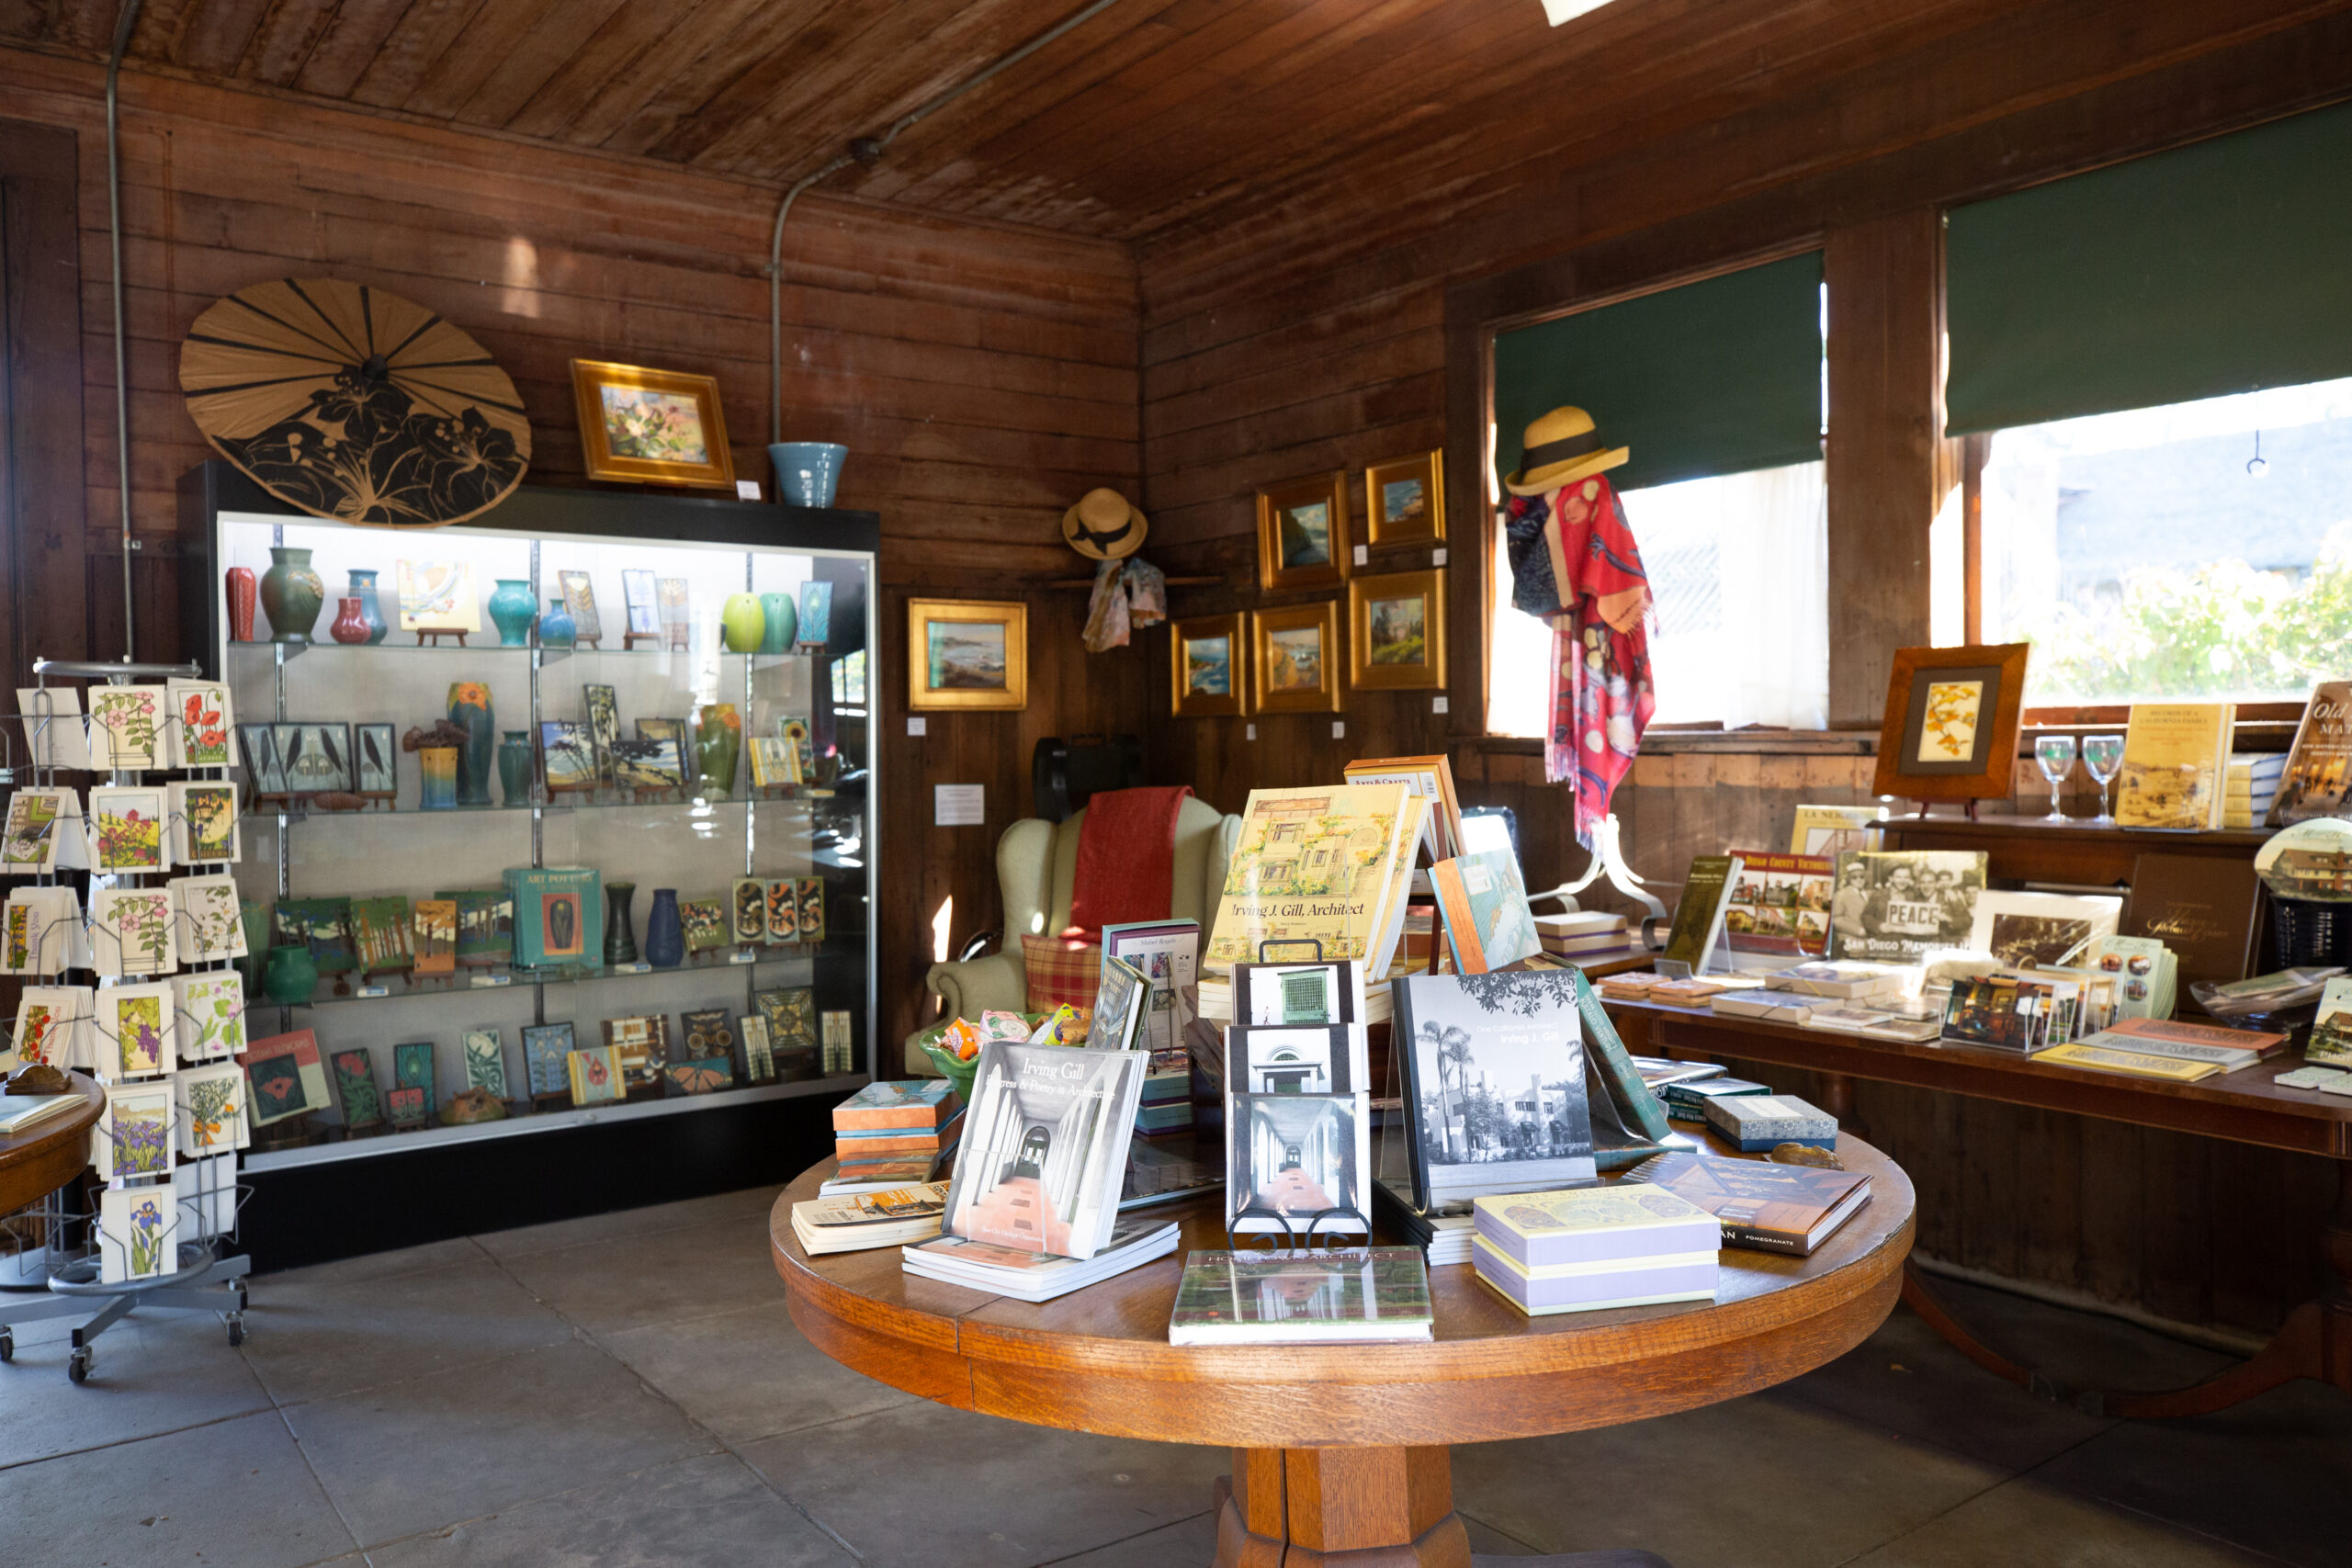 Interior of the Marston House Museum Shop. Various books, postcards, hats, and other items are on display for purchase.